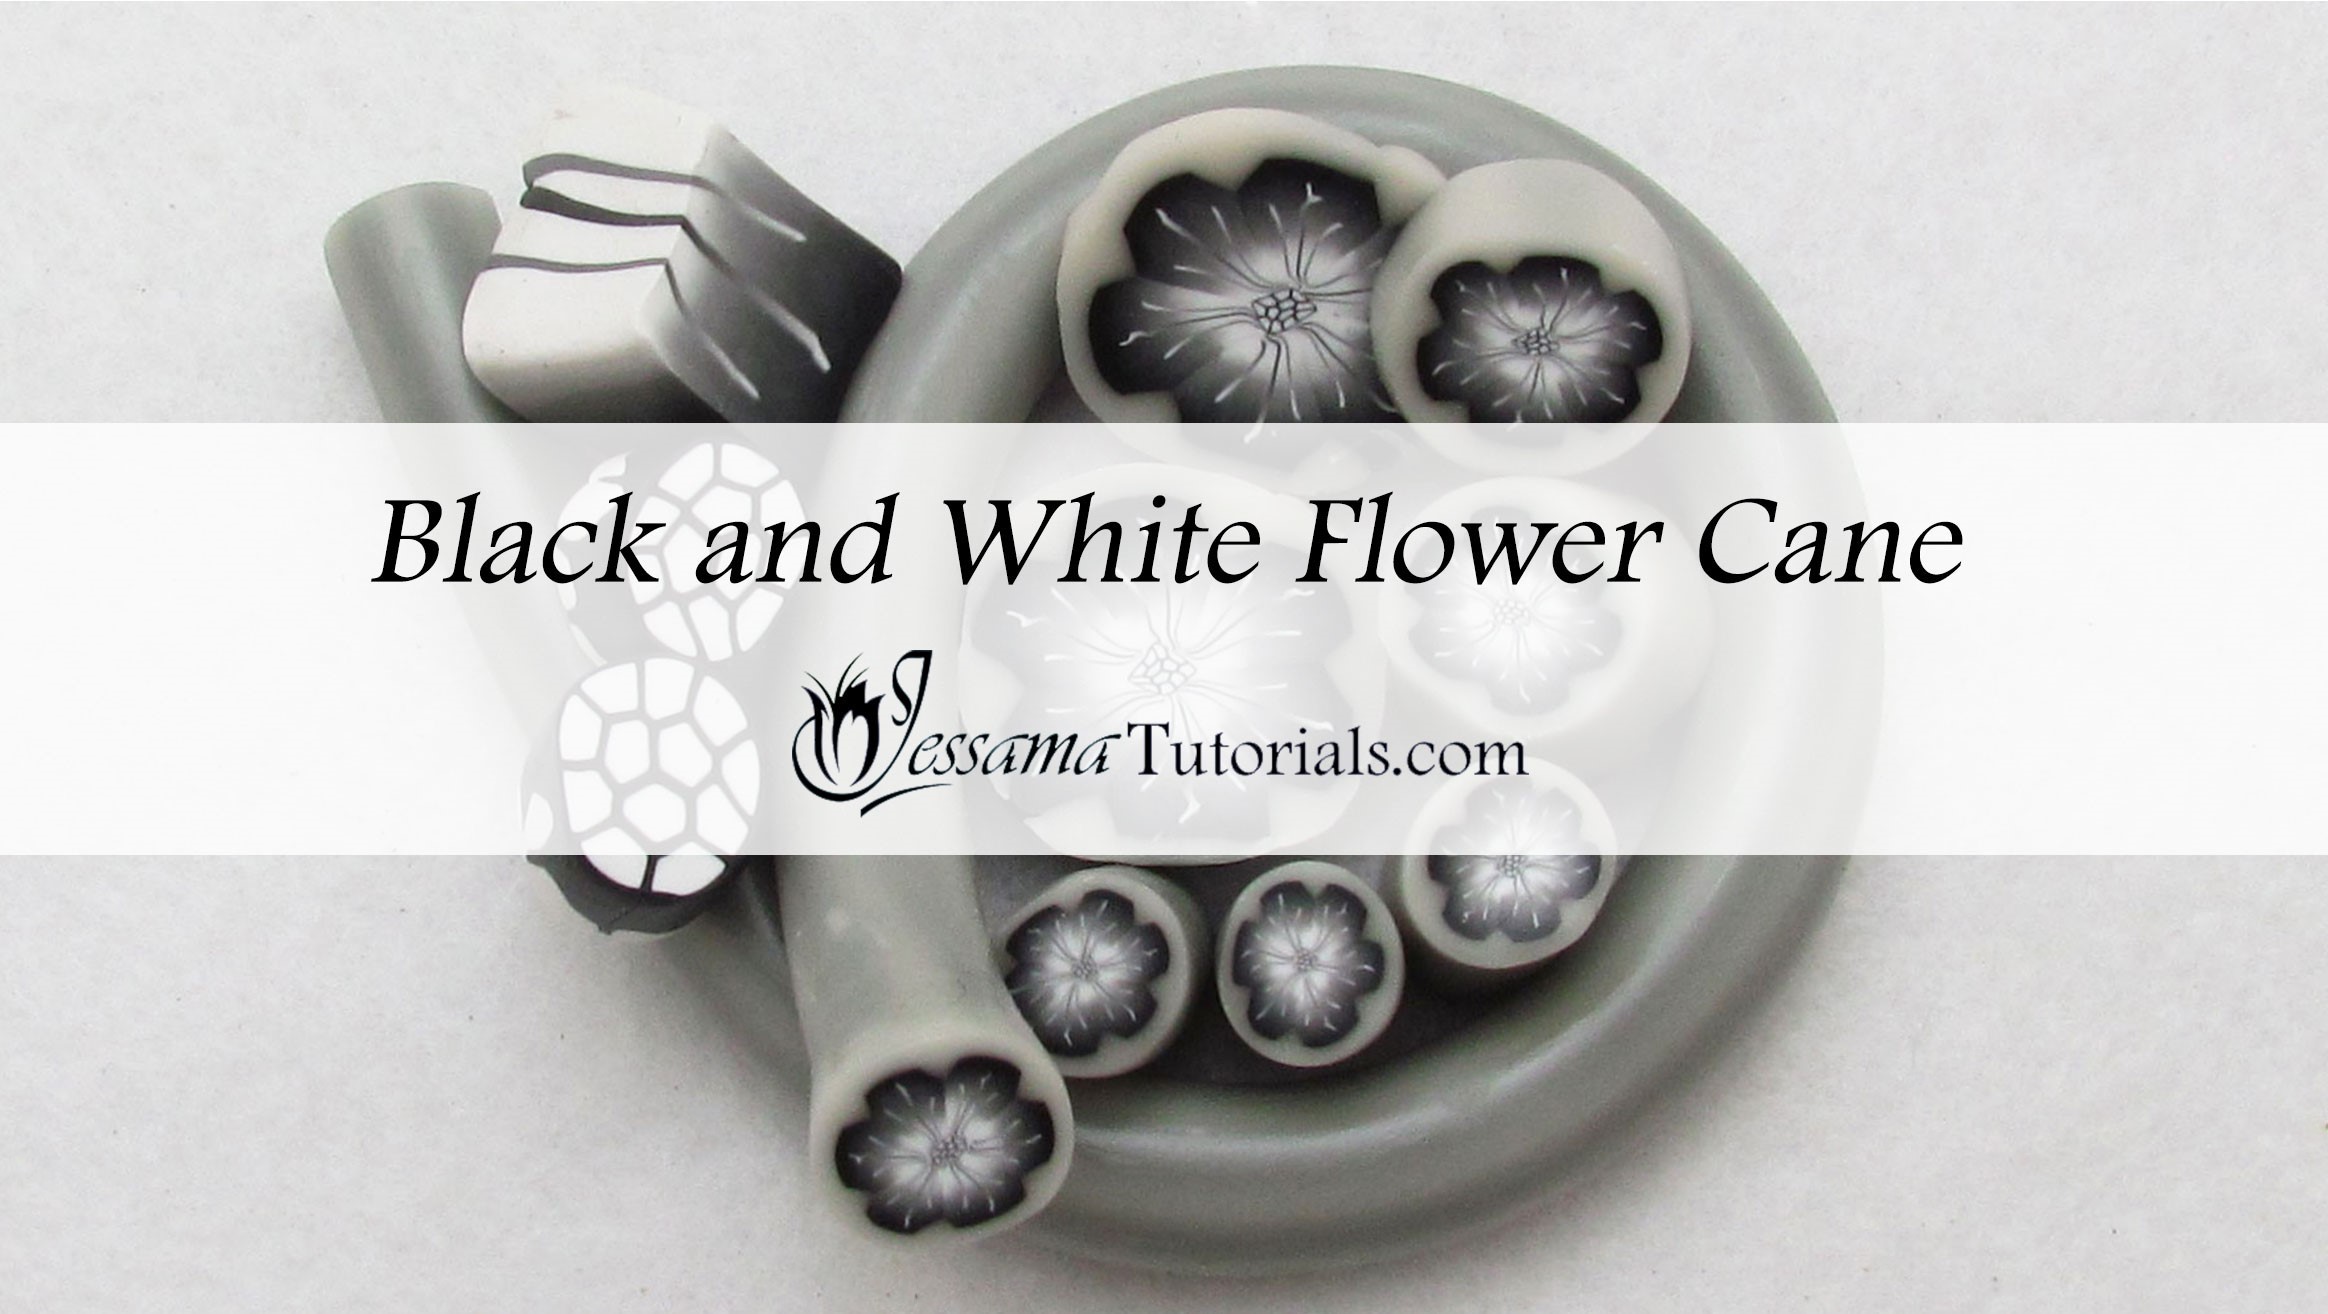 Black and white polymer clay flower canes